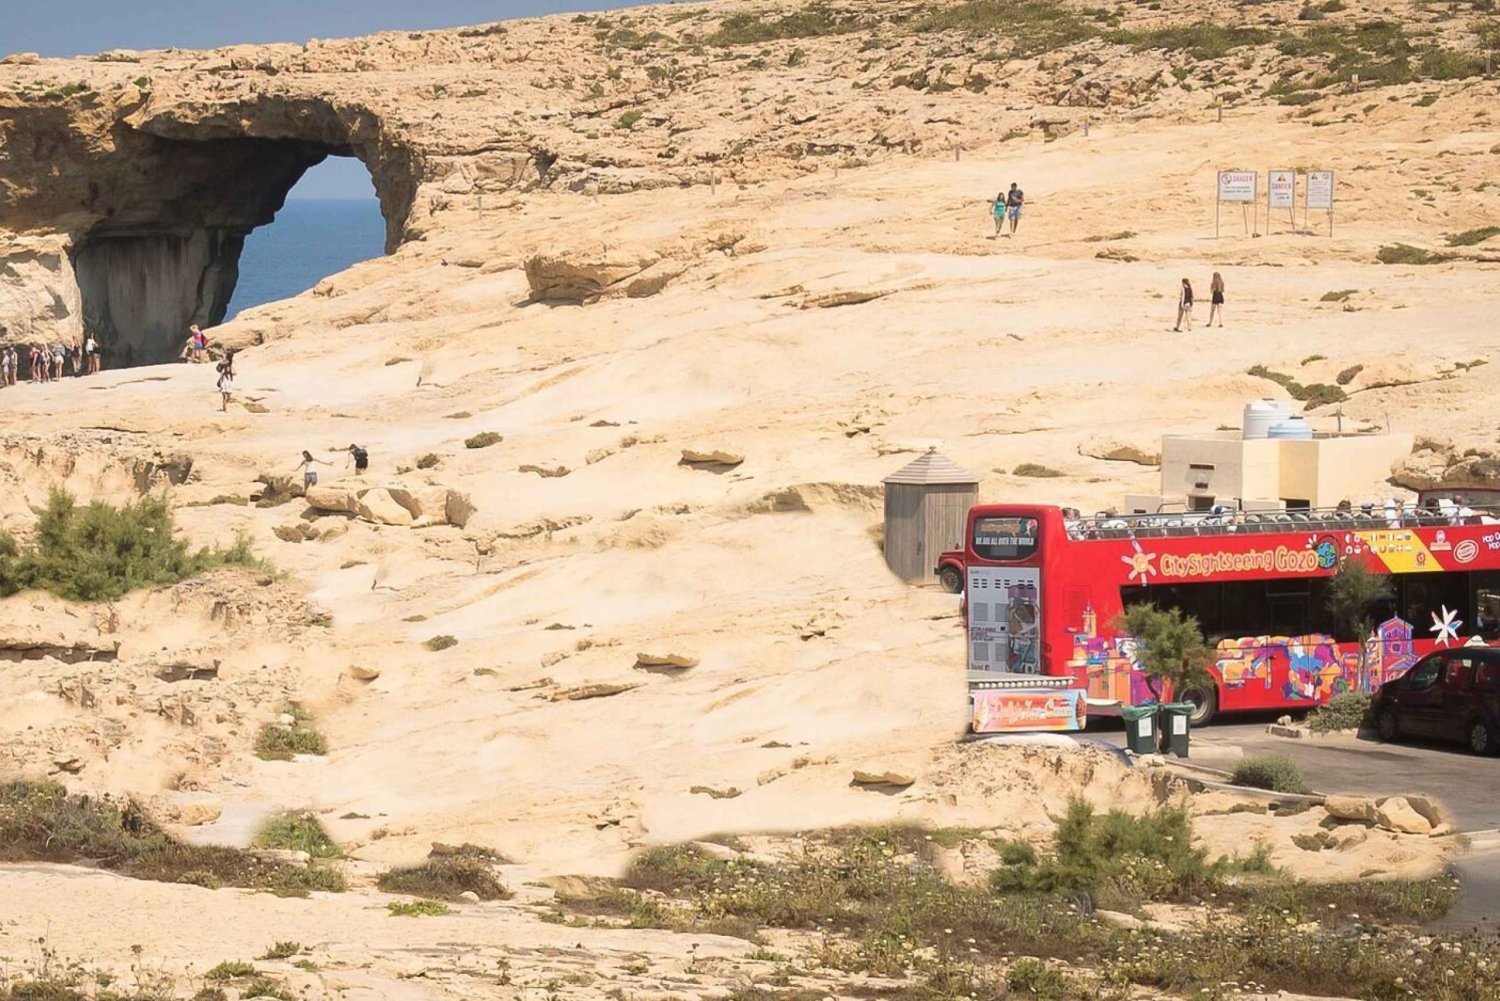 Gozo 1-Day Hop-On Hop-Off City Sightseeing Bus Tour